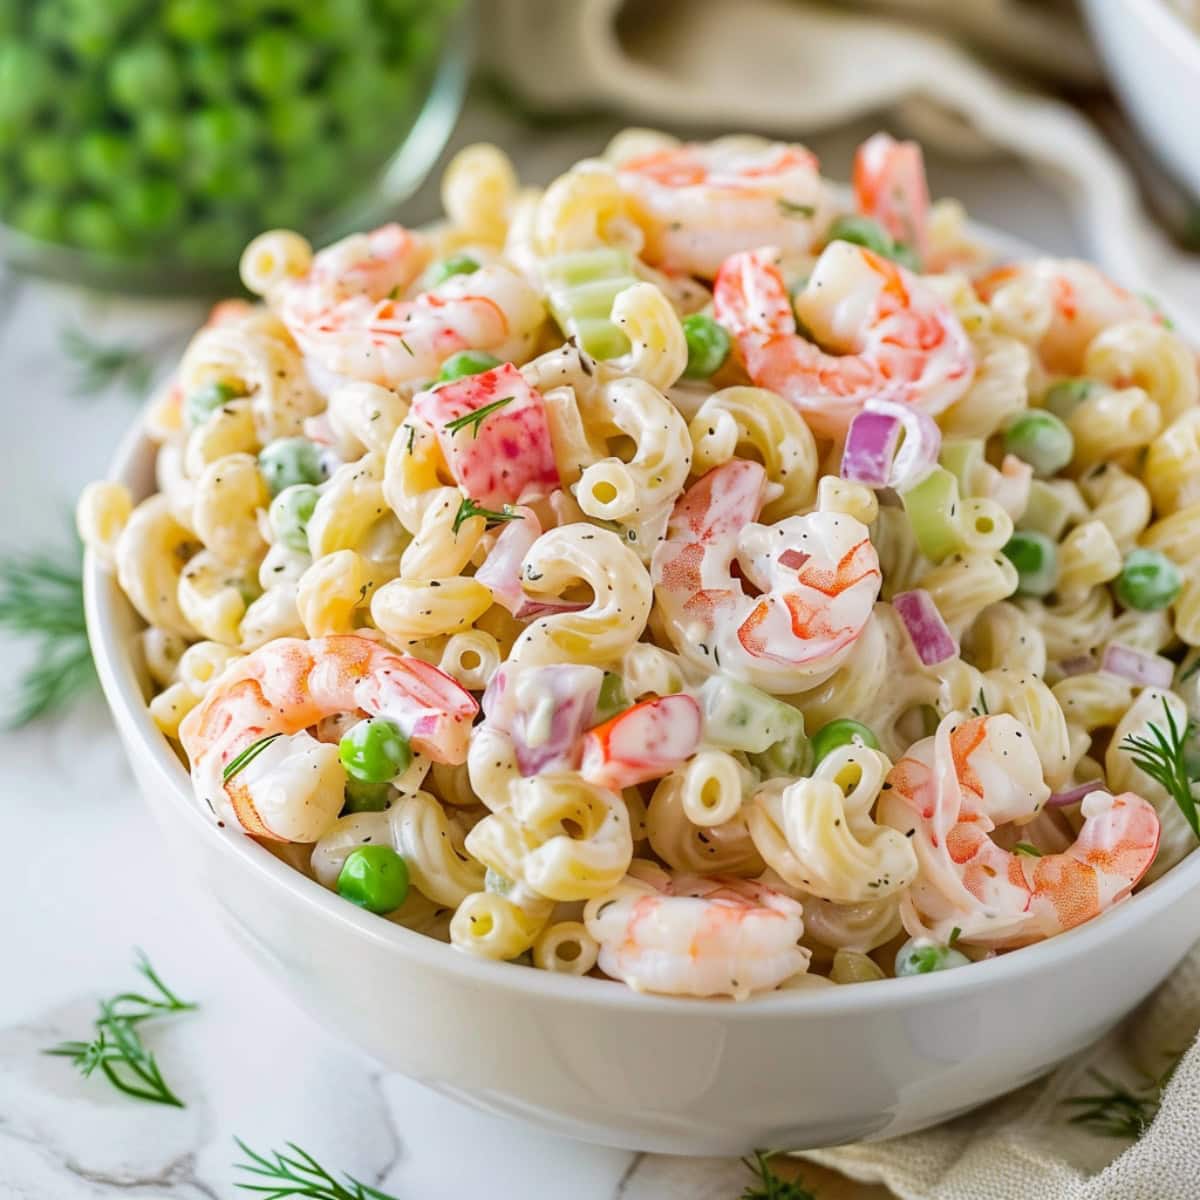 Shrimp pasta salad with mix of shrimps, green peas, pasta in creamy white dressing.